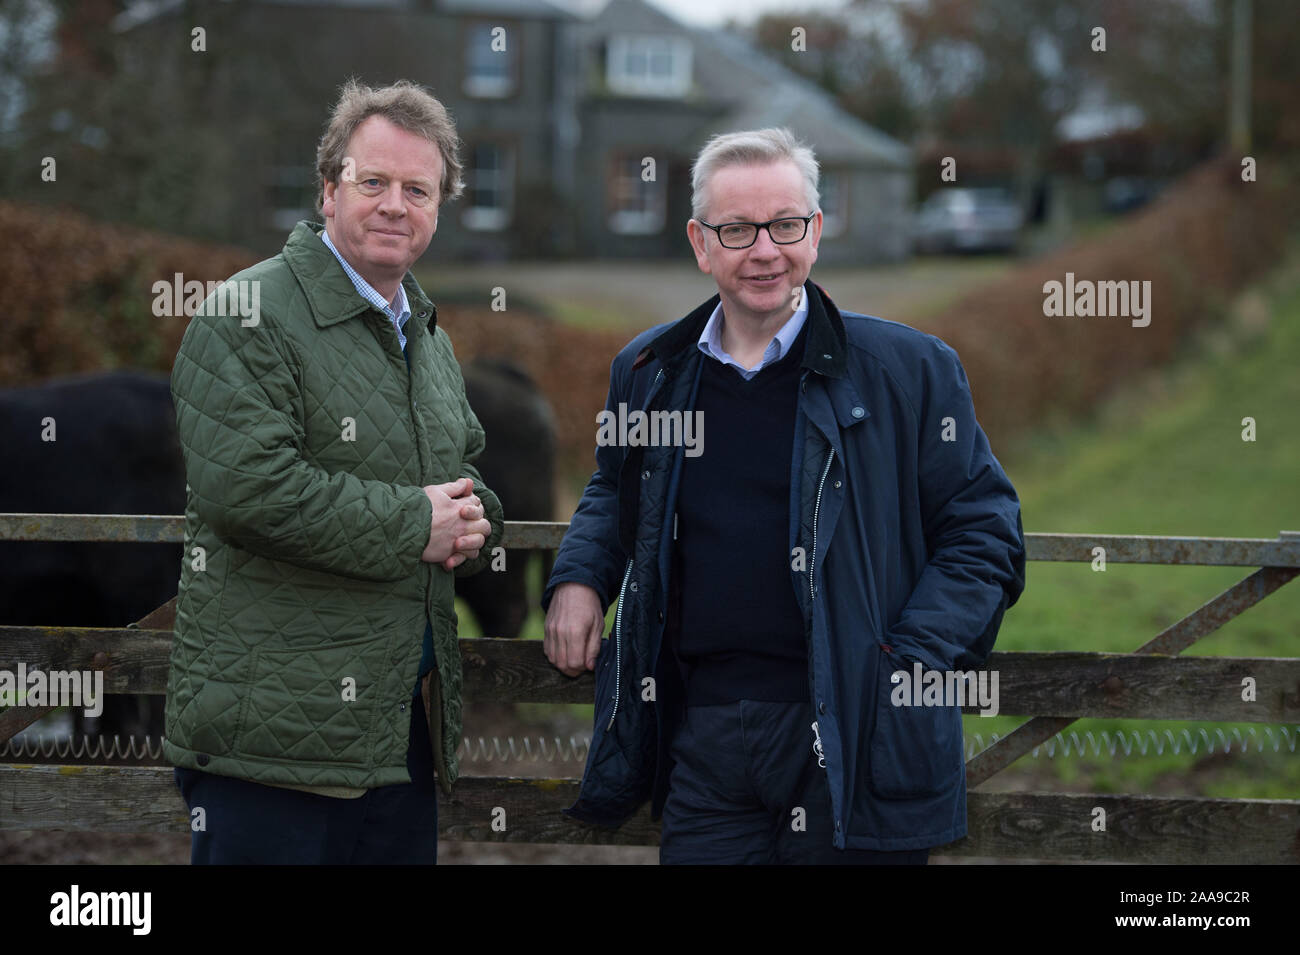 EMBARGOED UNTIL 17:30 TODAY (20TH NOVEMBER 2019) Glasgow, UK. 20th Nov, 2019. Pictured: (L-R) Alister Jack MP - Secretary of State for Scotland; Michael Gove MP - Chancellor of the Duchy of Lancaster. Mr Gove is seen campaigning in Scotland to secure the tory vote for the General Election on the 12th December. Credit: Colin Fisher/Alamy Live News Stock Photo